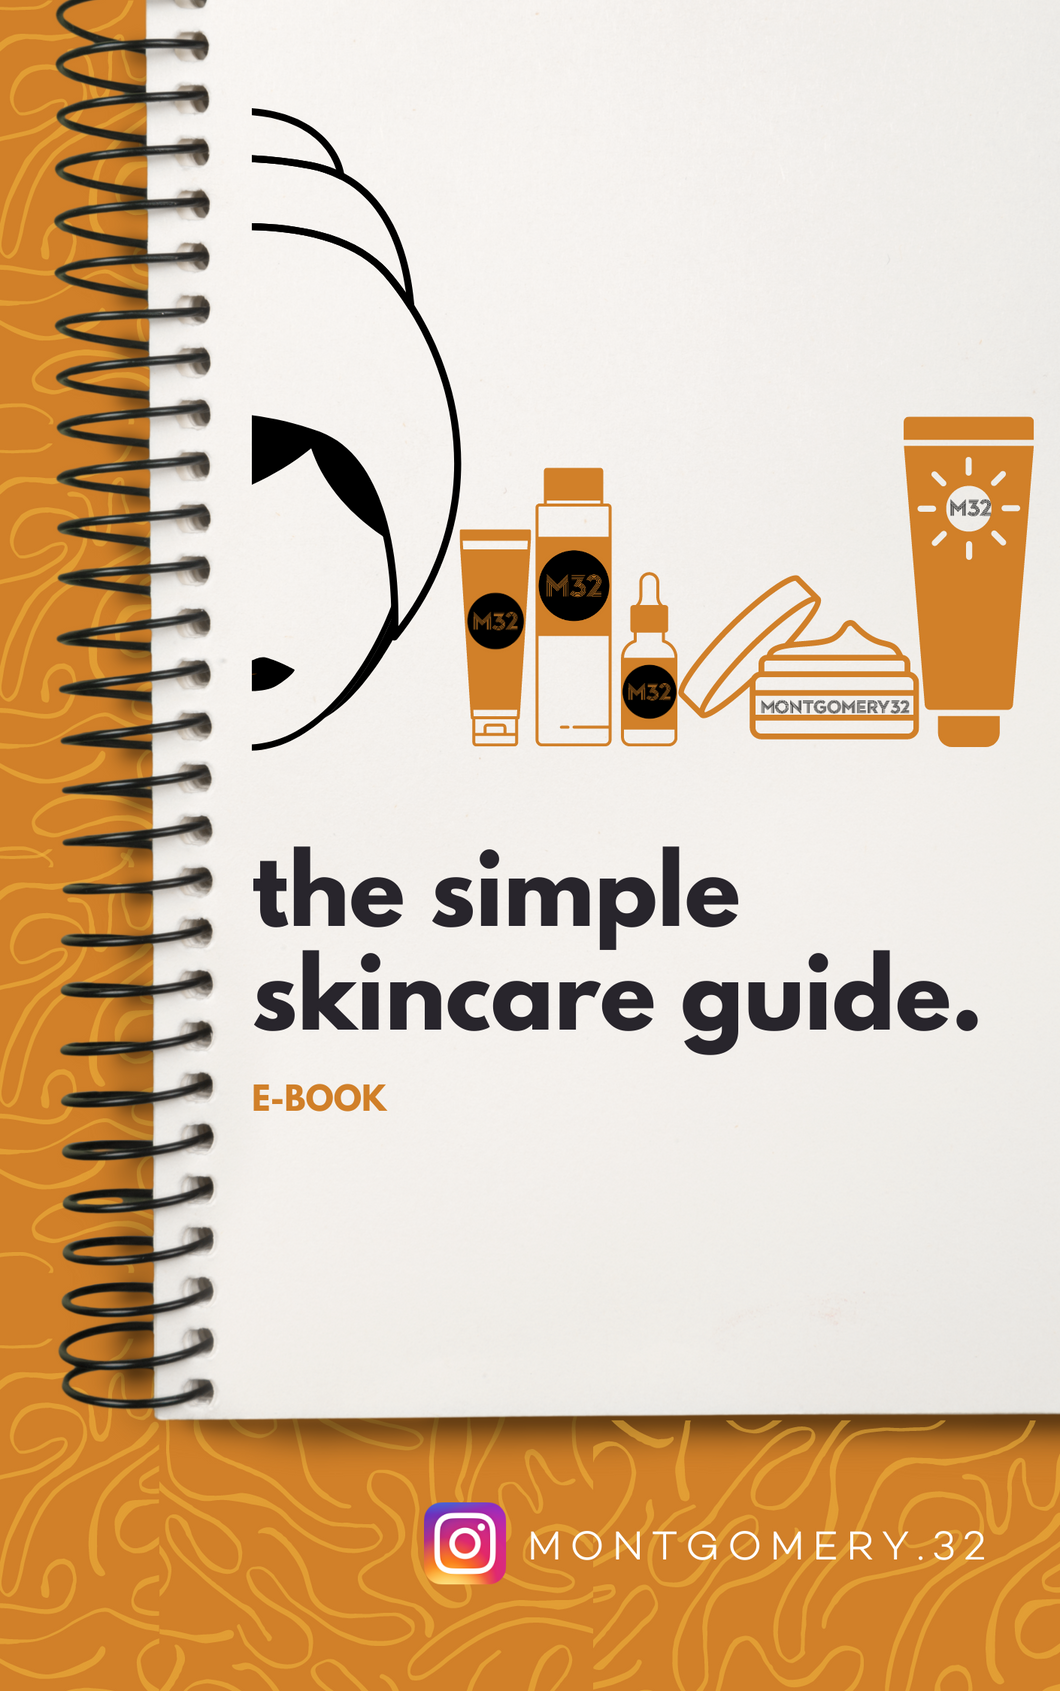 The Simple Skincare Guide